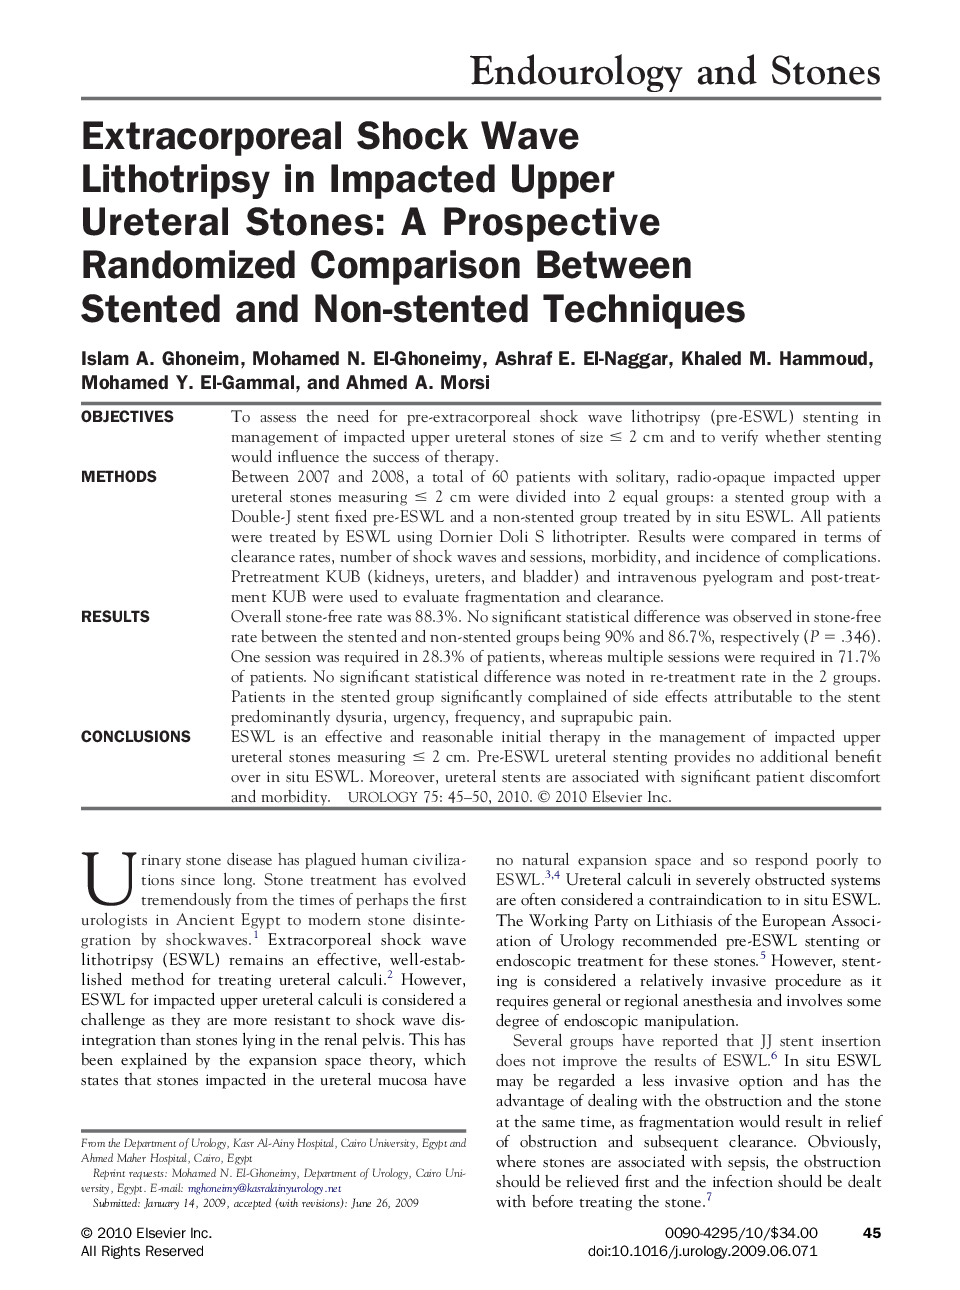 Extracorporeal Shock Wave Lithotripsy in Impacted Upper Ureteral Stones: A Prospective Randomized Comparison Between Stented and Non-stented Techniques